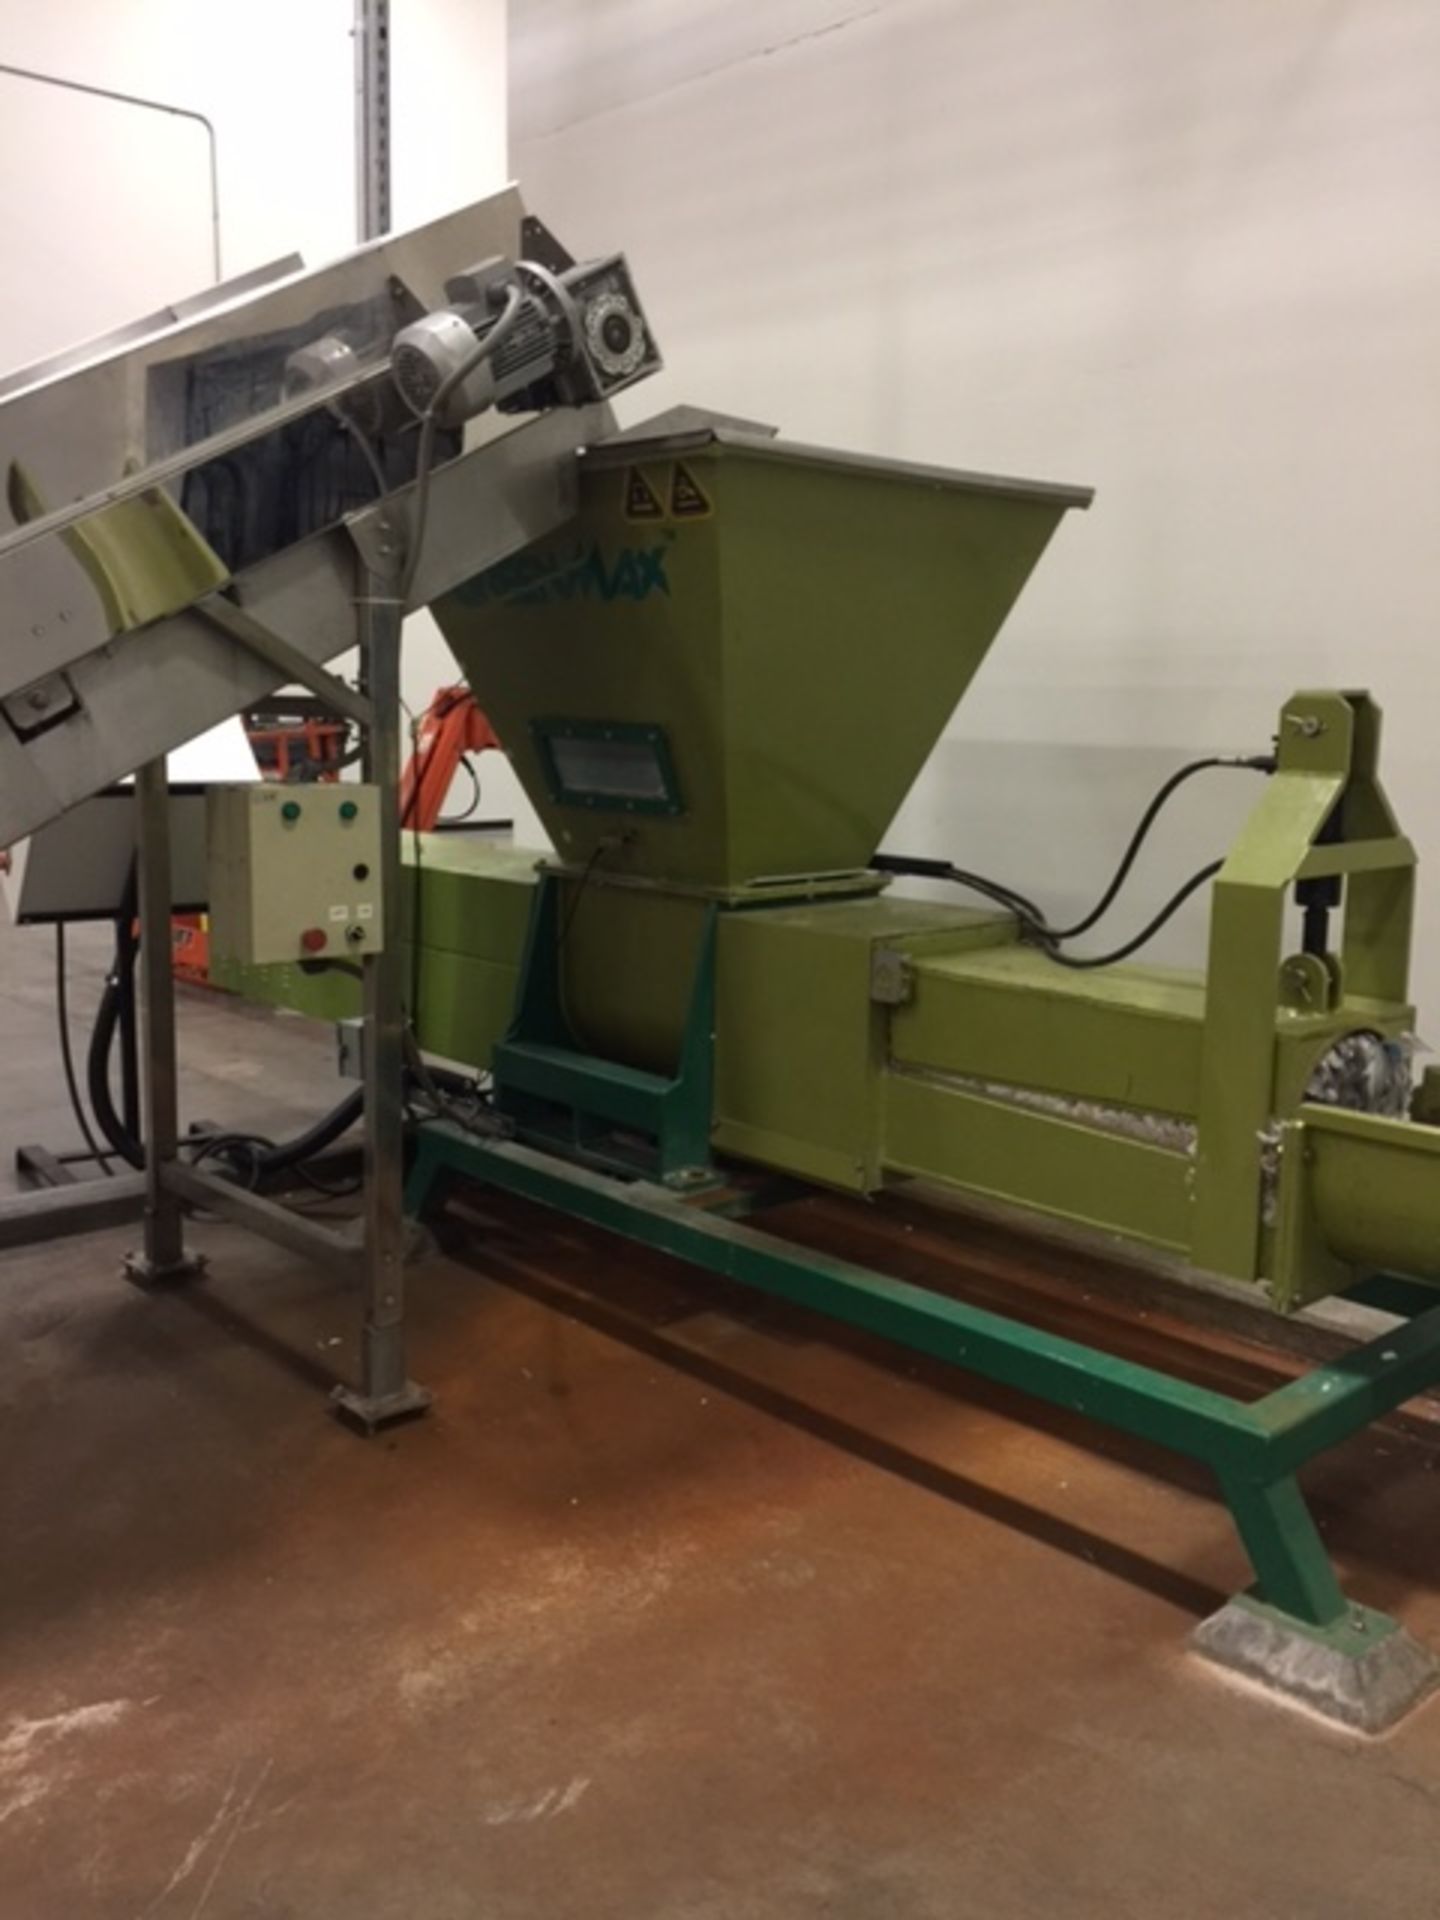 2013 Greenmax PET Bottle Compactor, Model C350 (Located in Denver) - Image 2 of 6